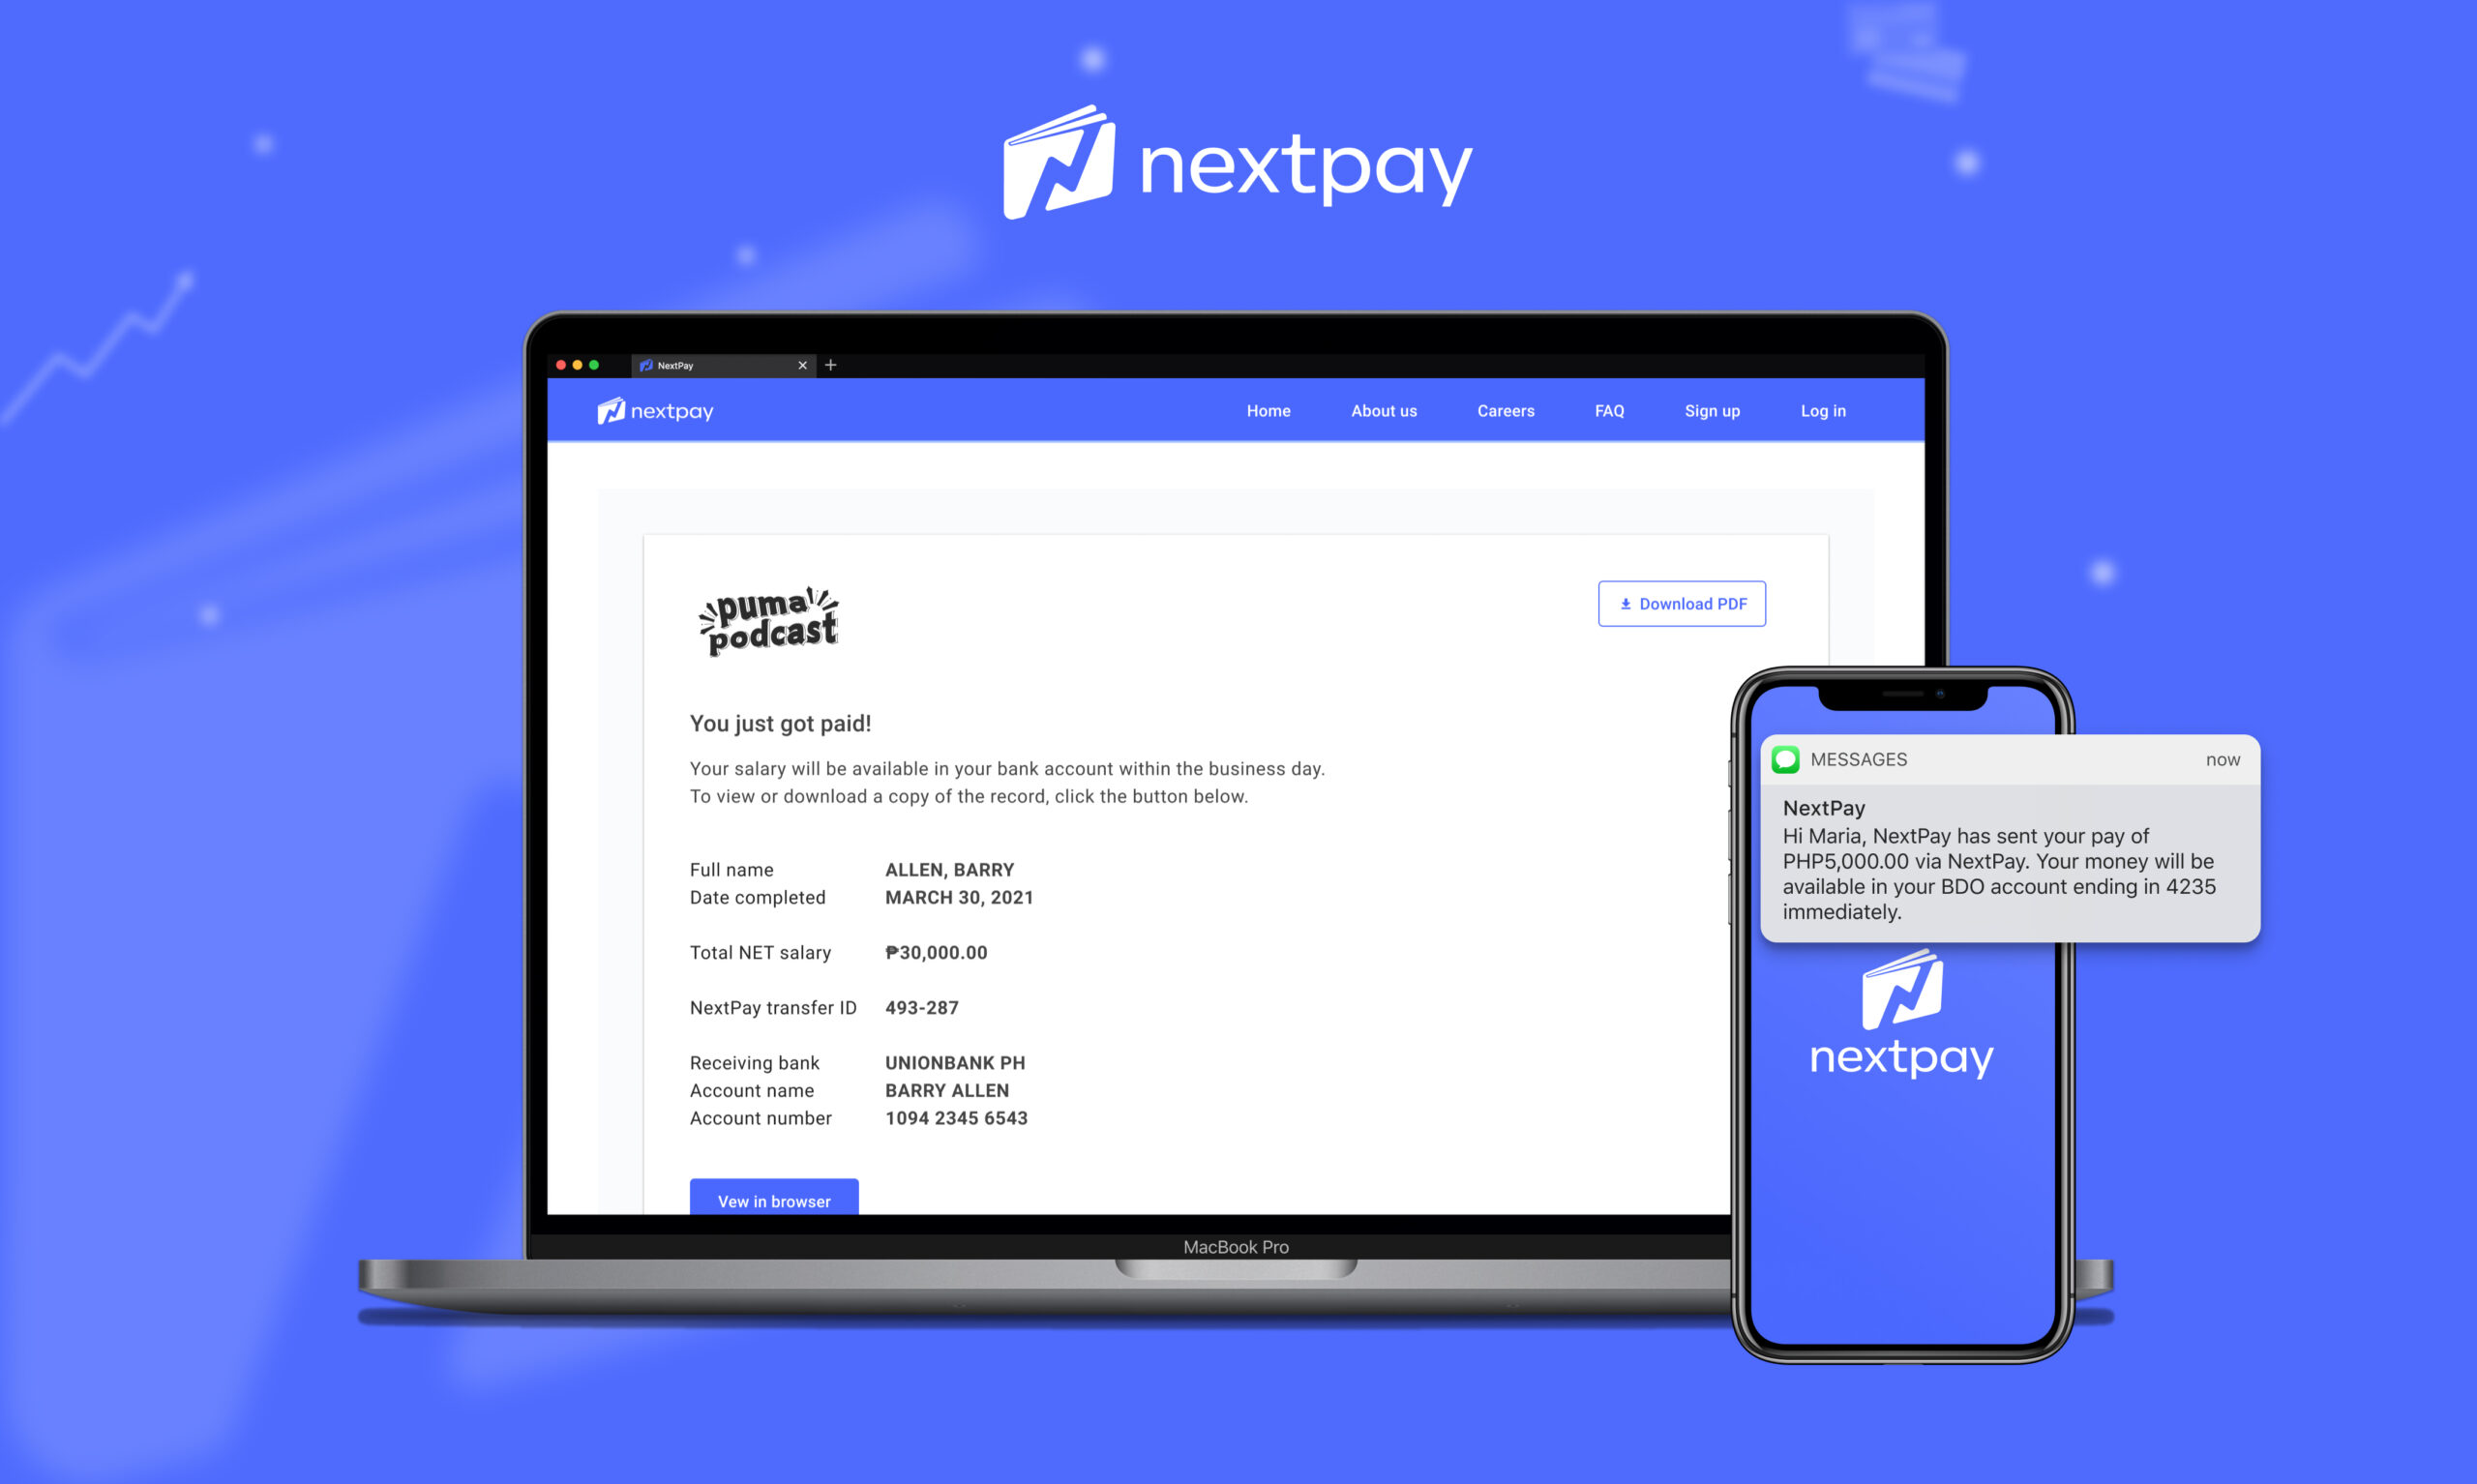 NextPay achieves 300+% transaction growth with a solid customer acquisition strategy